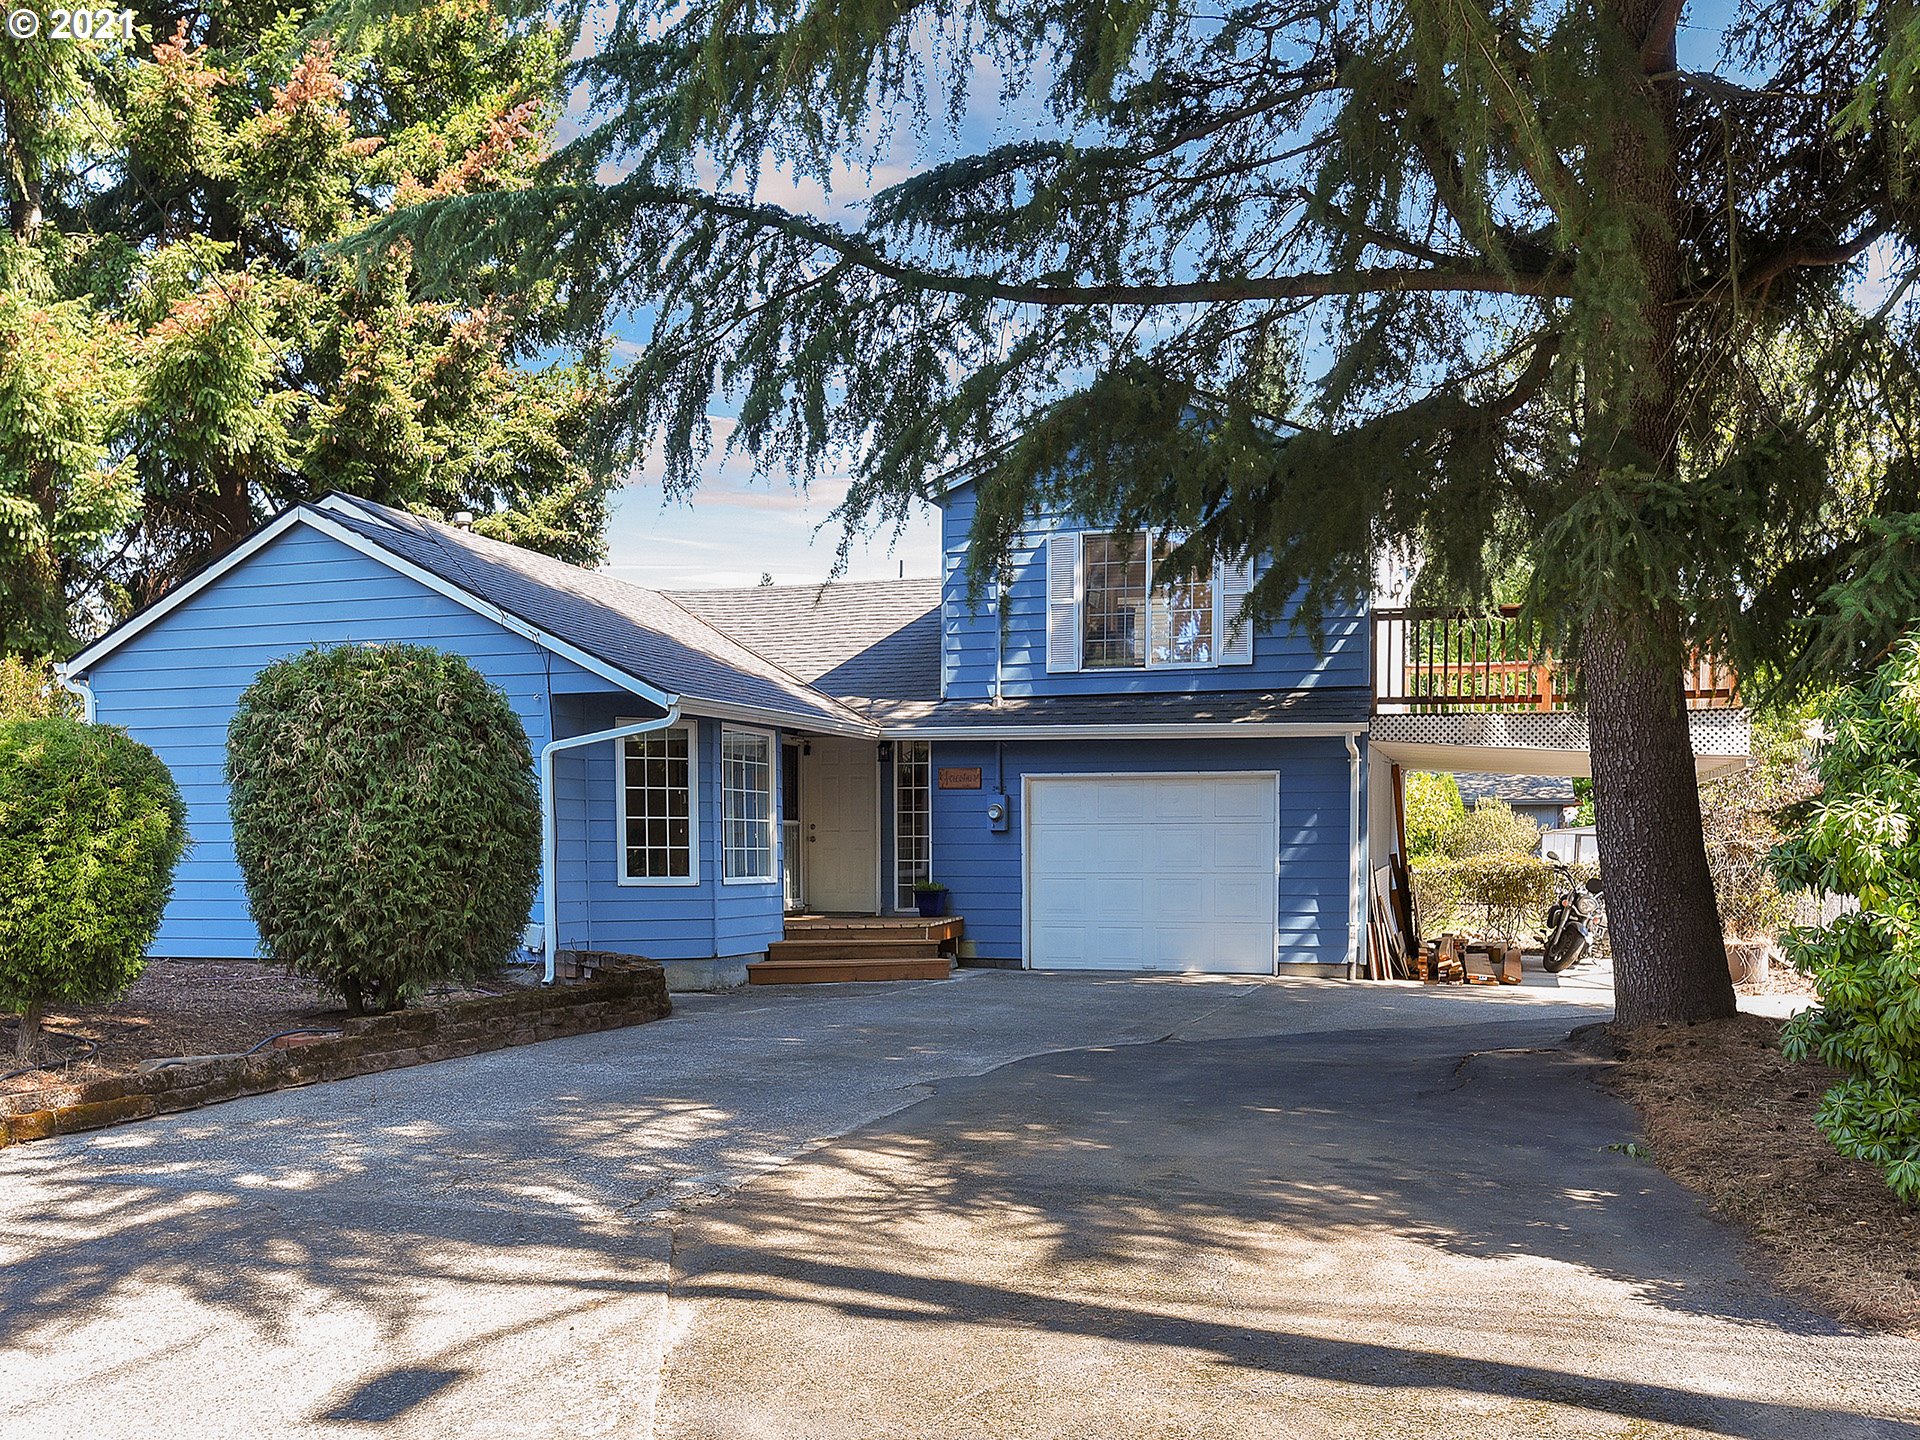 2342 SE 110TH AVE (1 of 22)